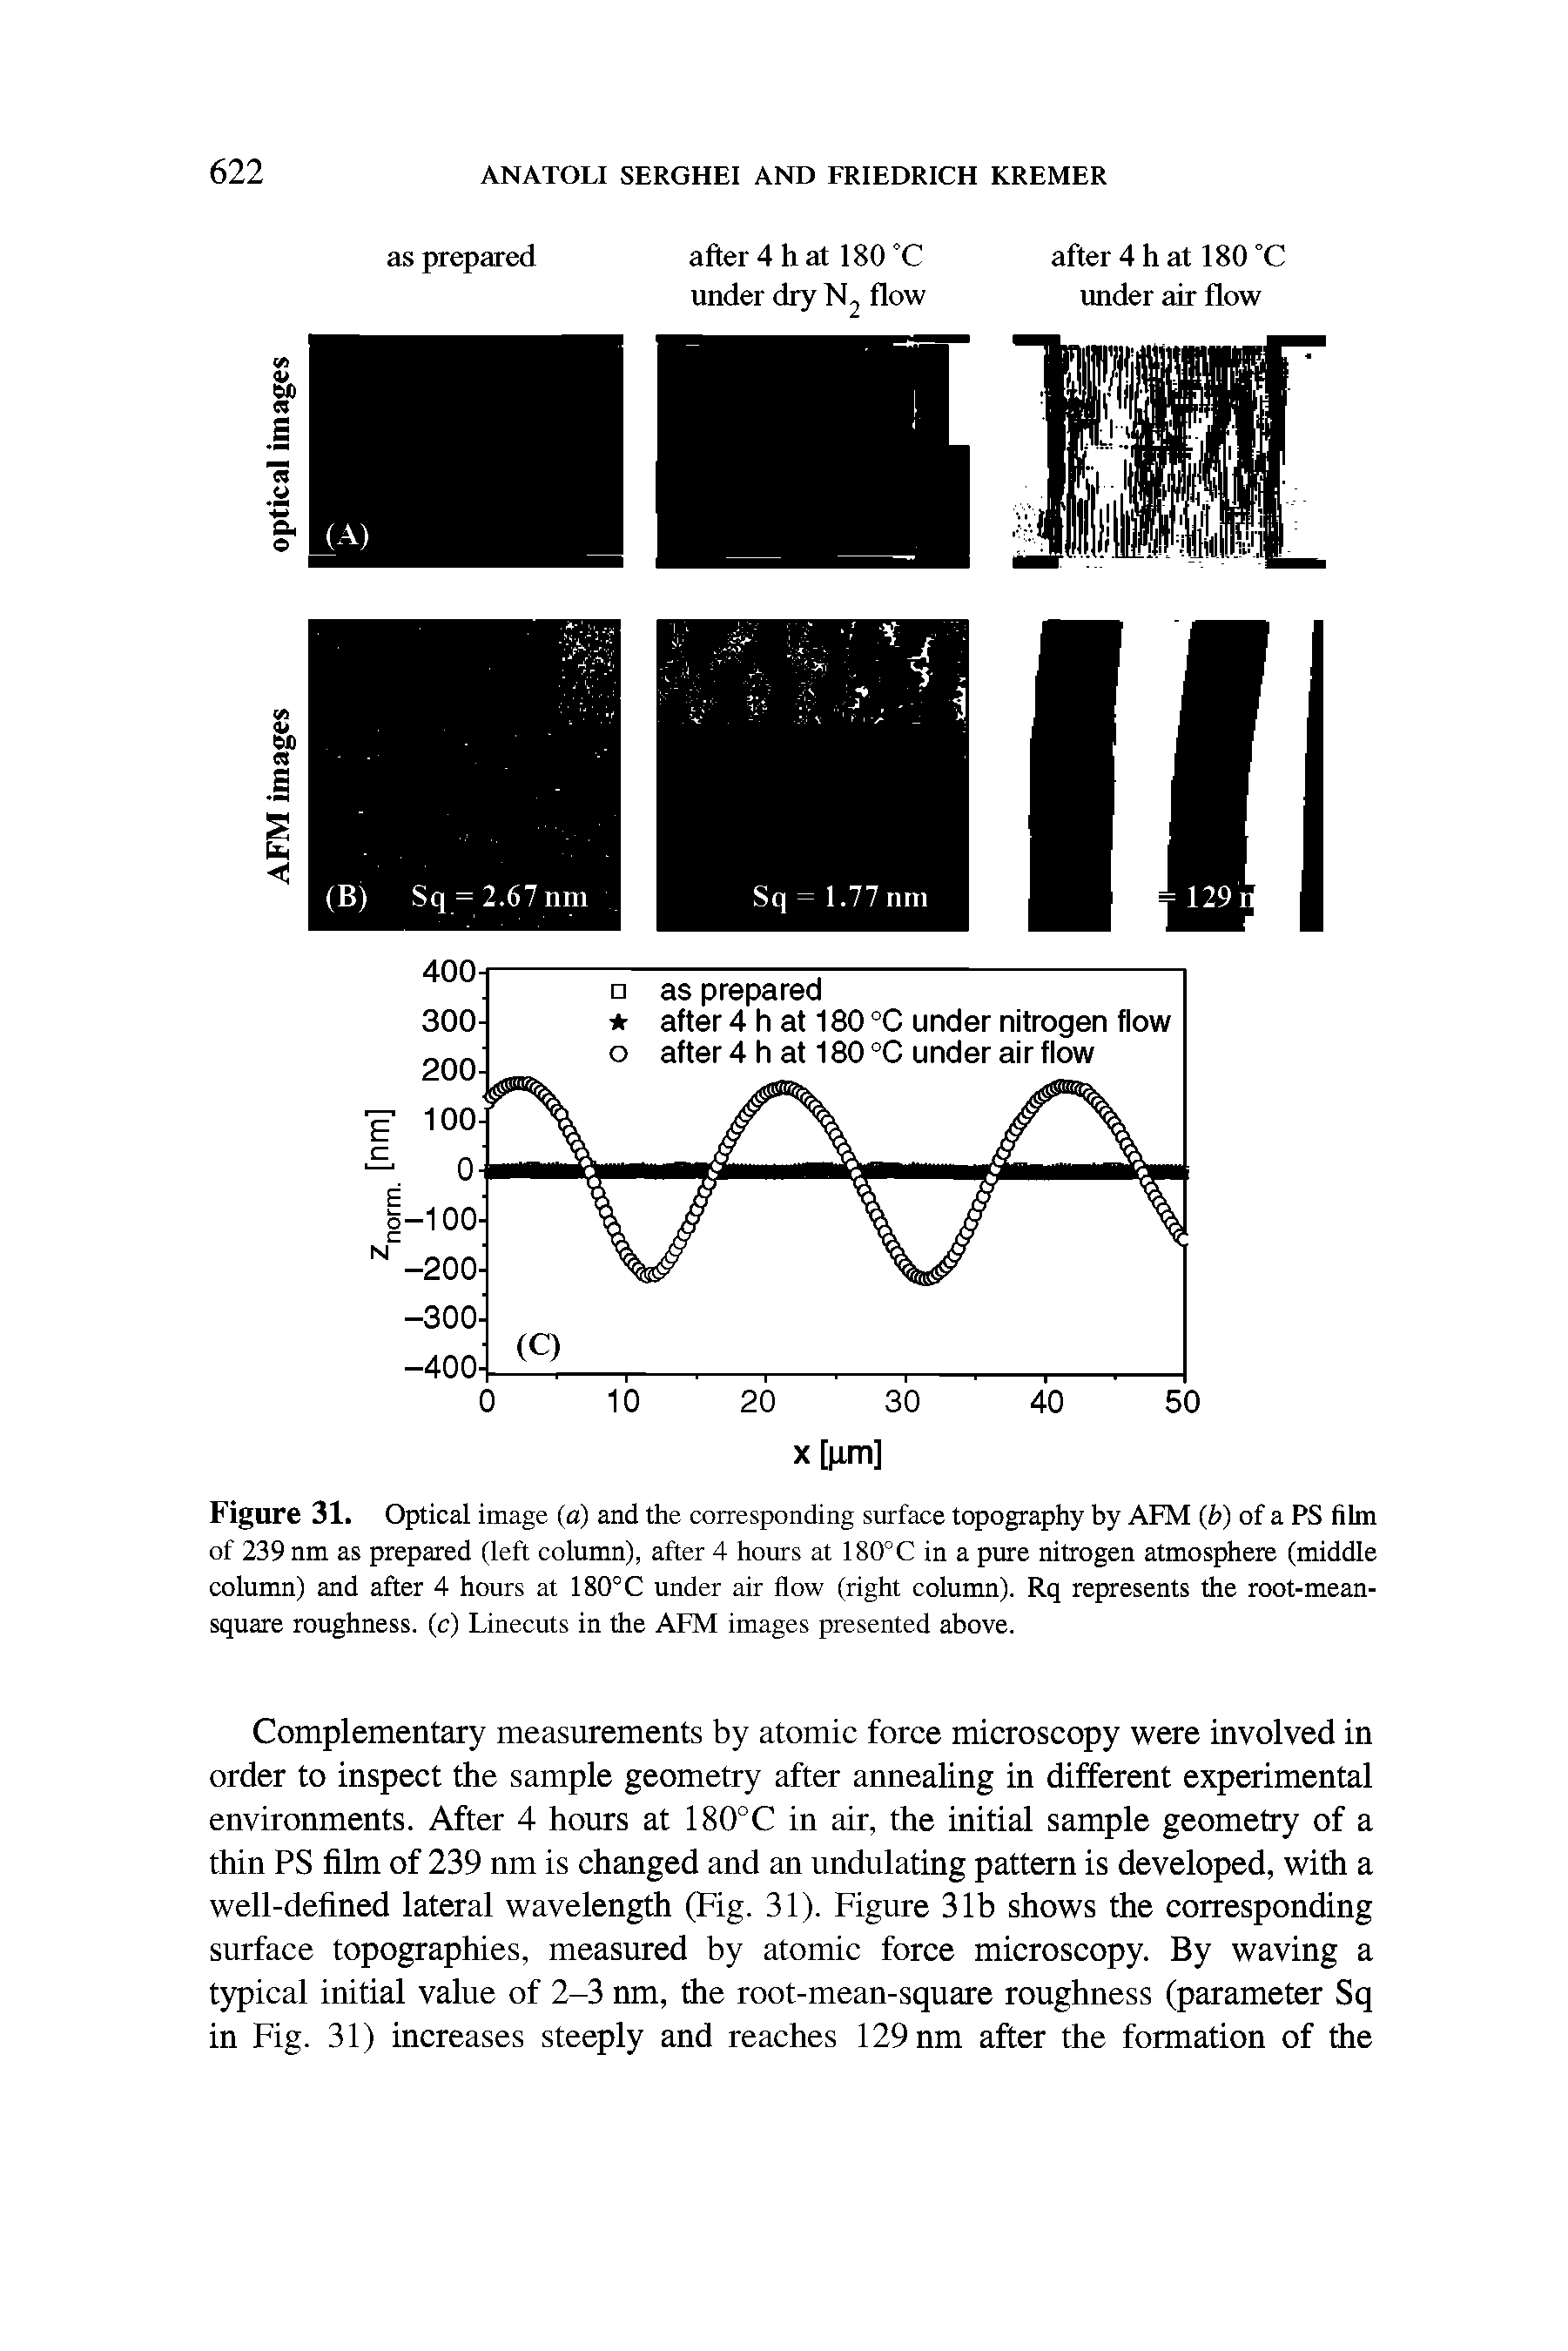 Figure 31. Optical image (a) and the corresponding surface topography by AFM (b) of a PS film of 239 nm as prepared (left column), after 4 hours at 180°C in a pure nitrogen atmosphere (middle column) and after 4 hours at 180°C under air flow (right column). Rq represents the root-mean-square roughness, (c) Linecuts in the AFM images presented above.